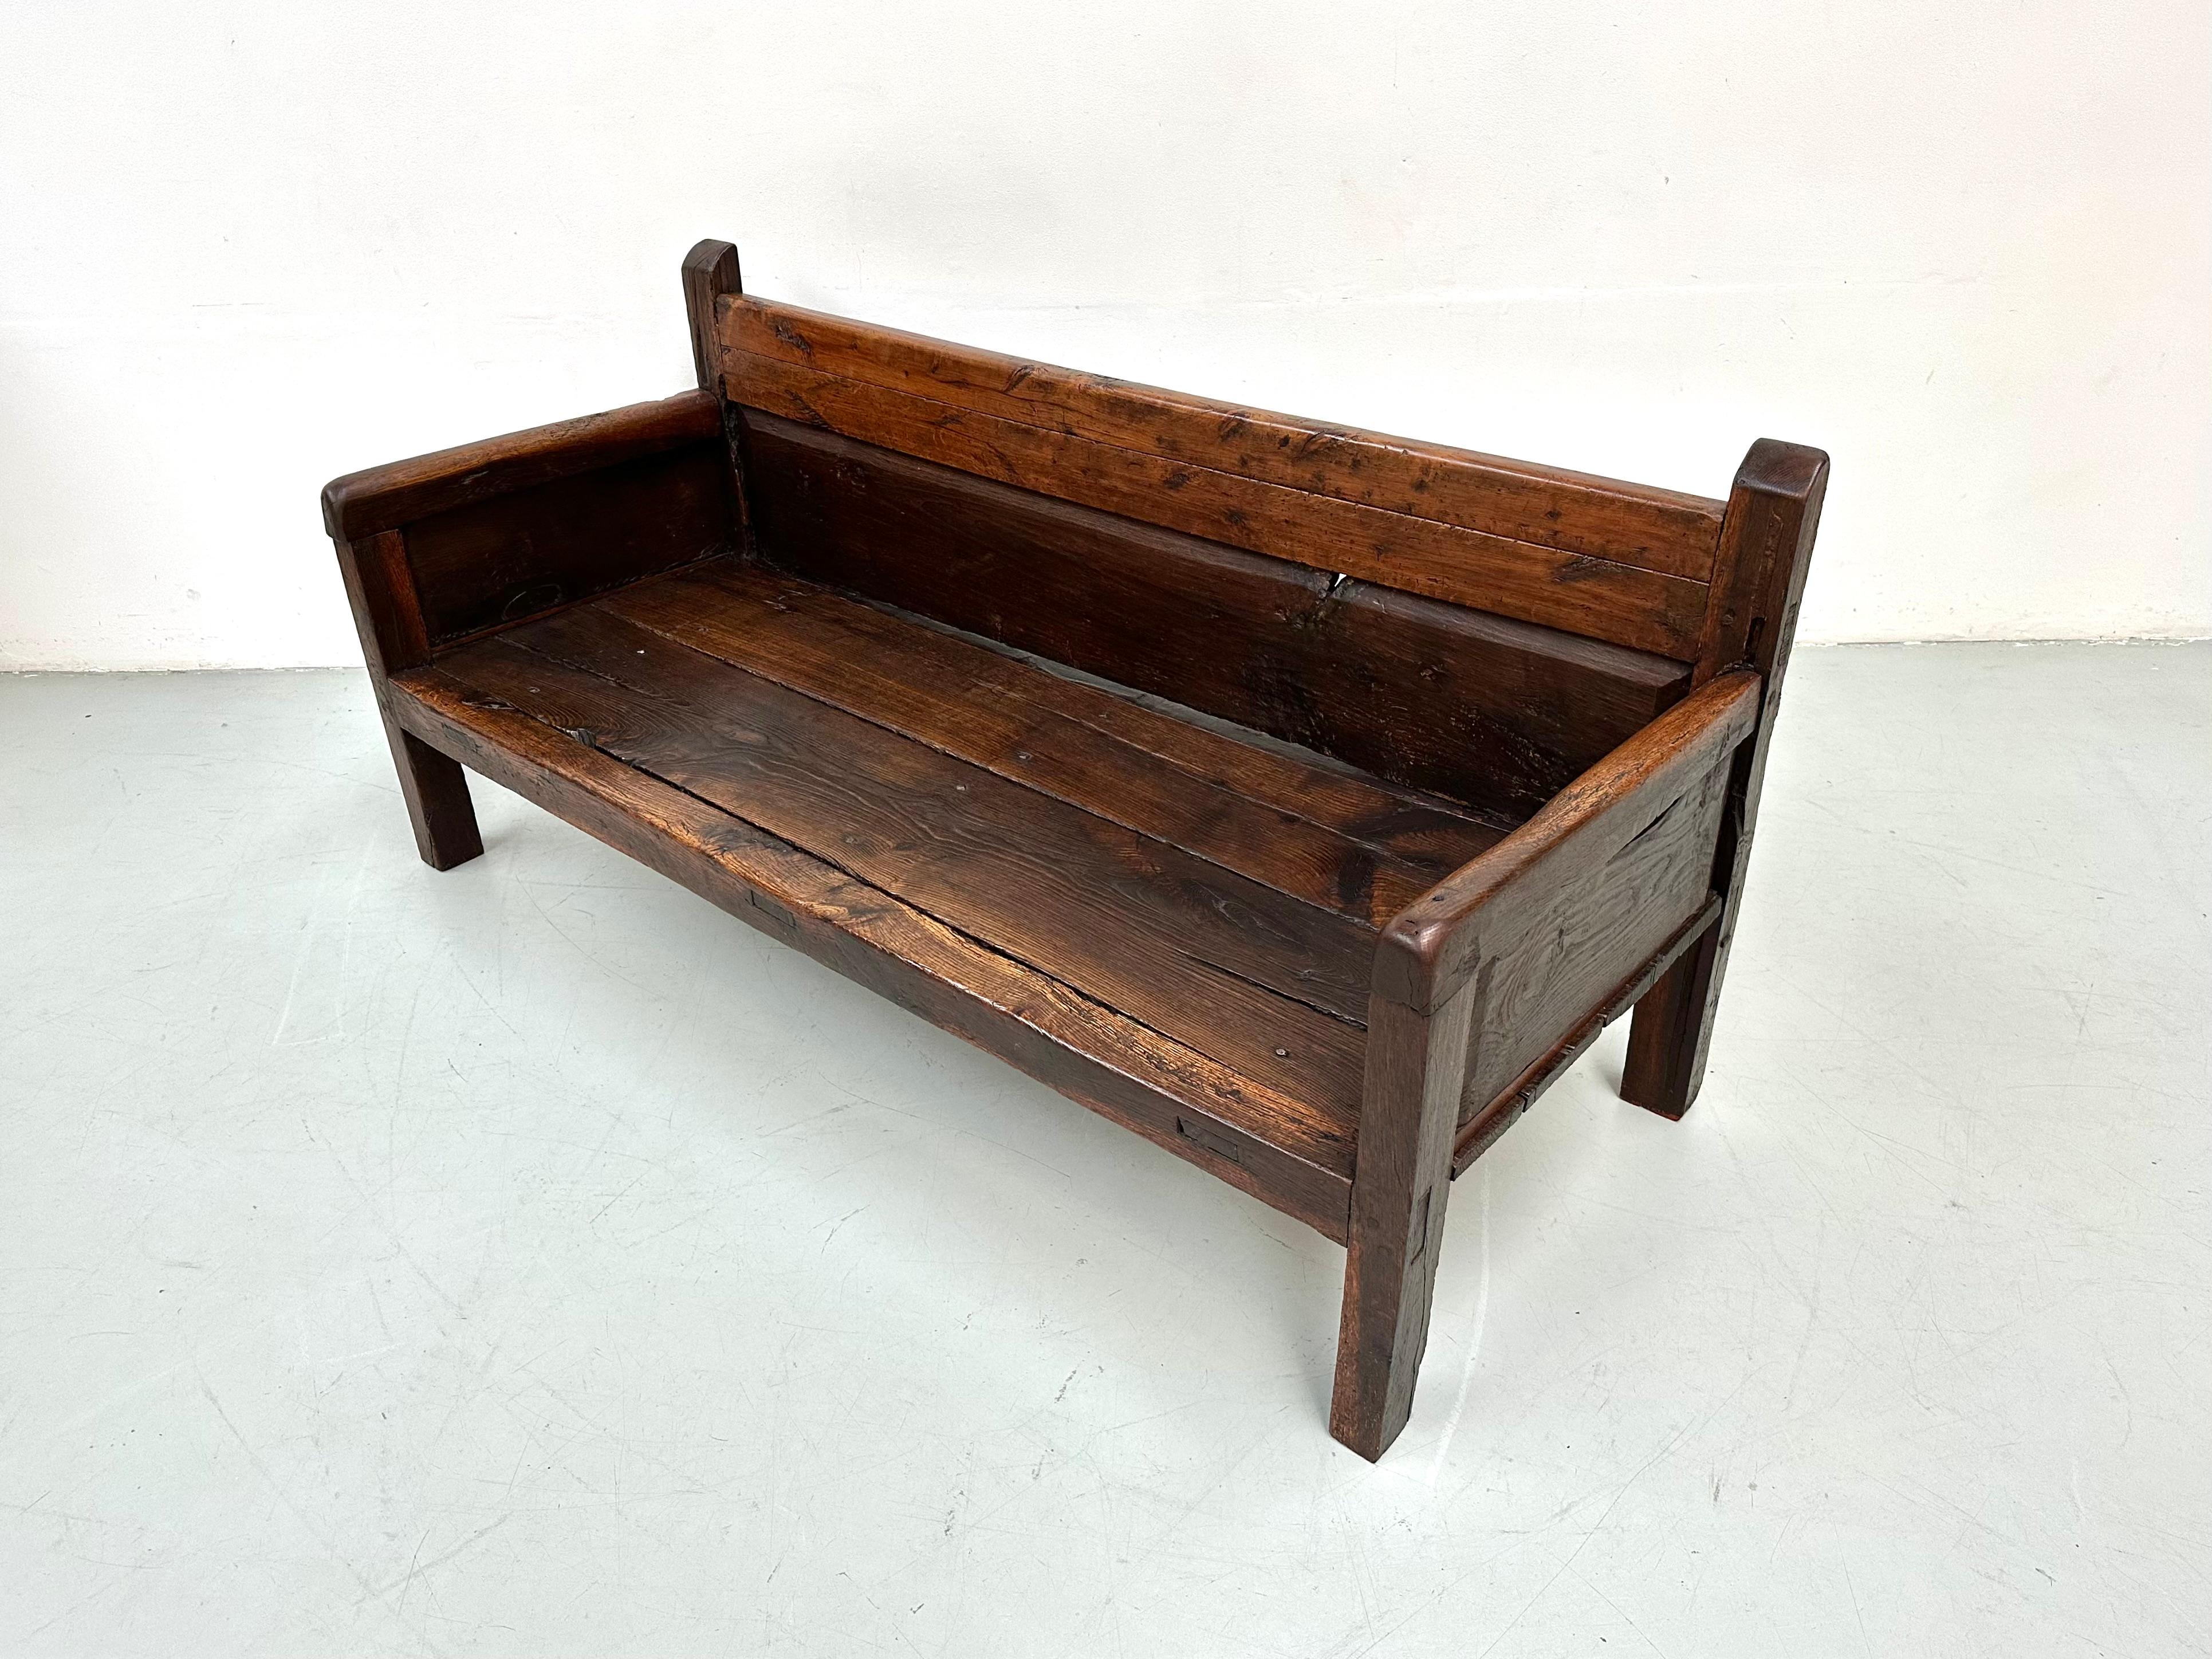 This early-19th century rustic Fruitwood Spanish large settle bench was handcrafted on Spain's southeastern coast. Handmade of solid fruitwood, having four sculptural posts that rise up from each leg. This bench has aged slowly and has a beautiful